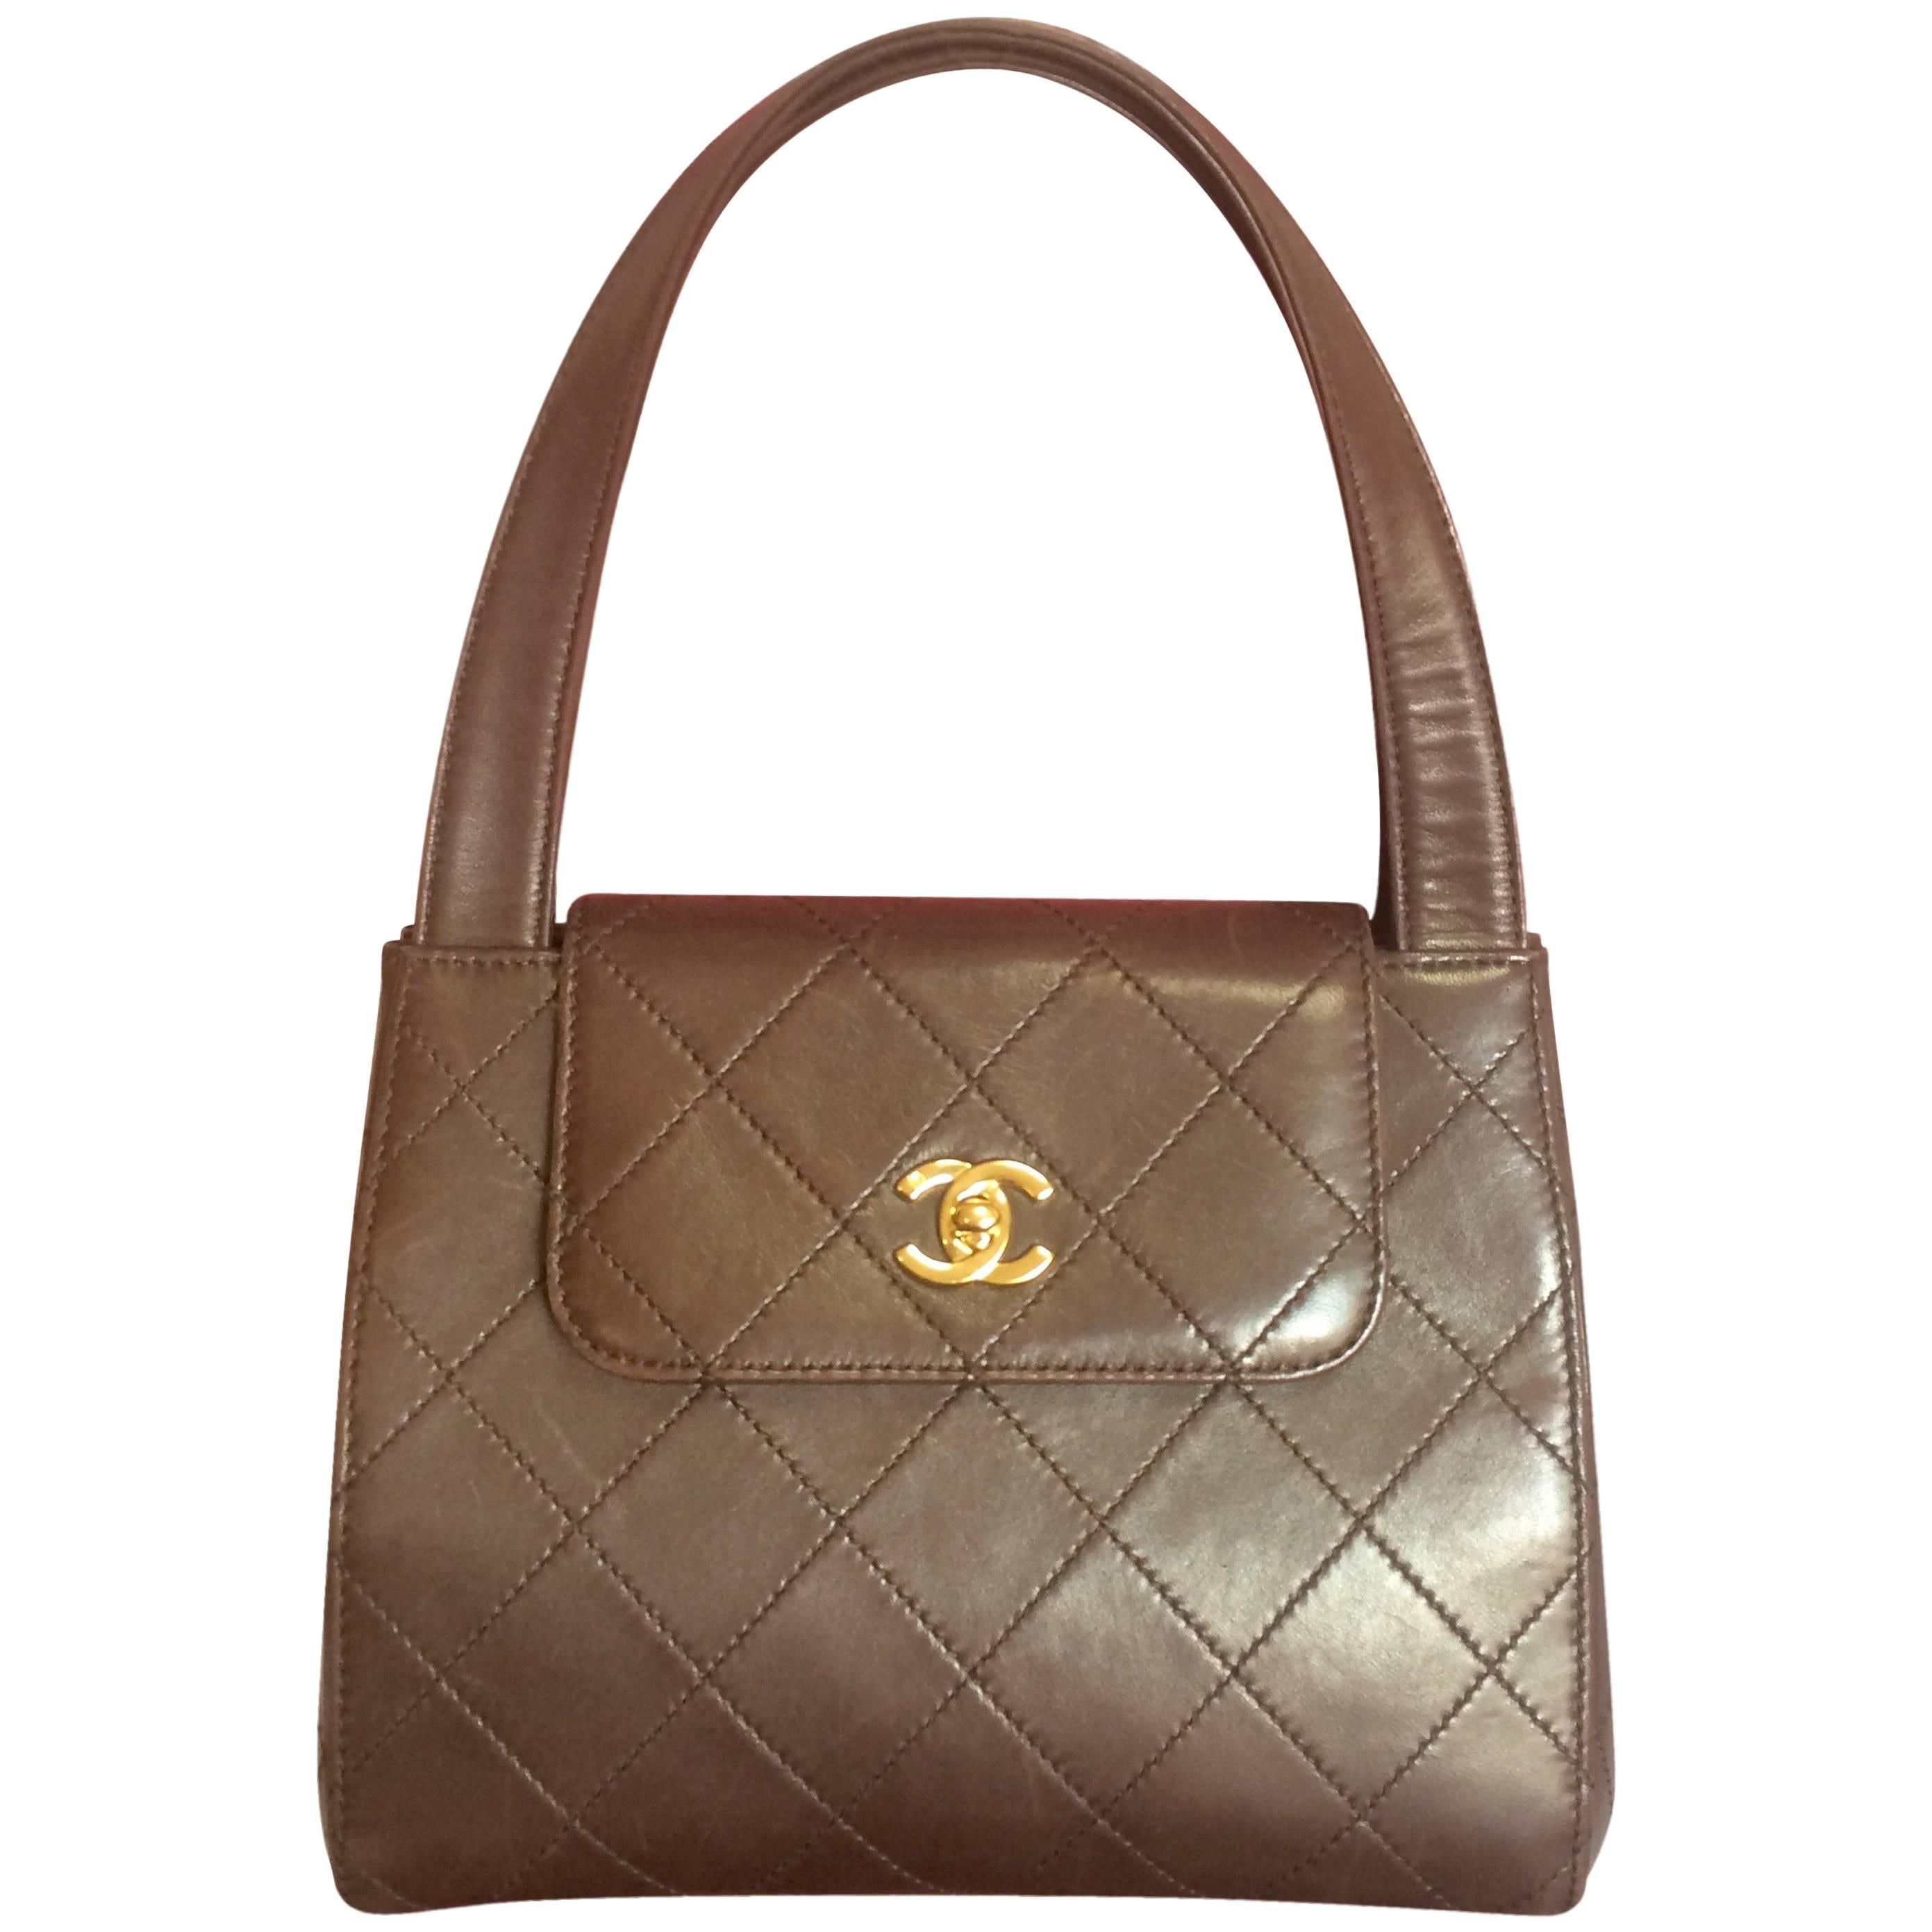 Vintage CHANEL chocolate brown leather trapezoid shape handbag with golden CC. For Sale